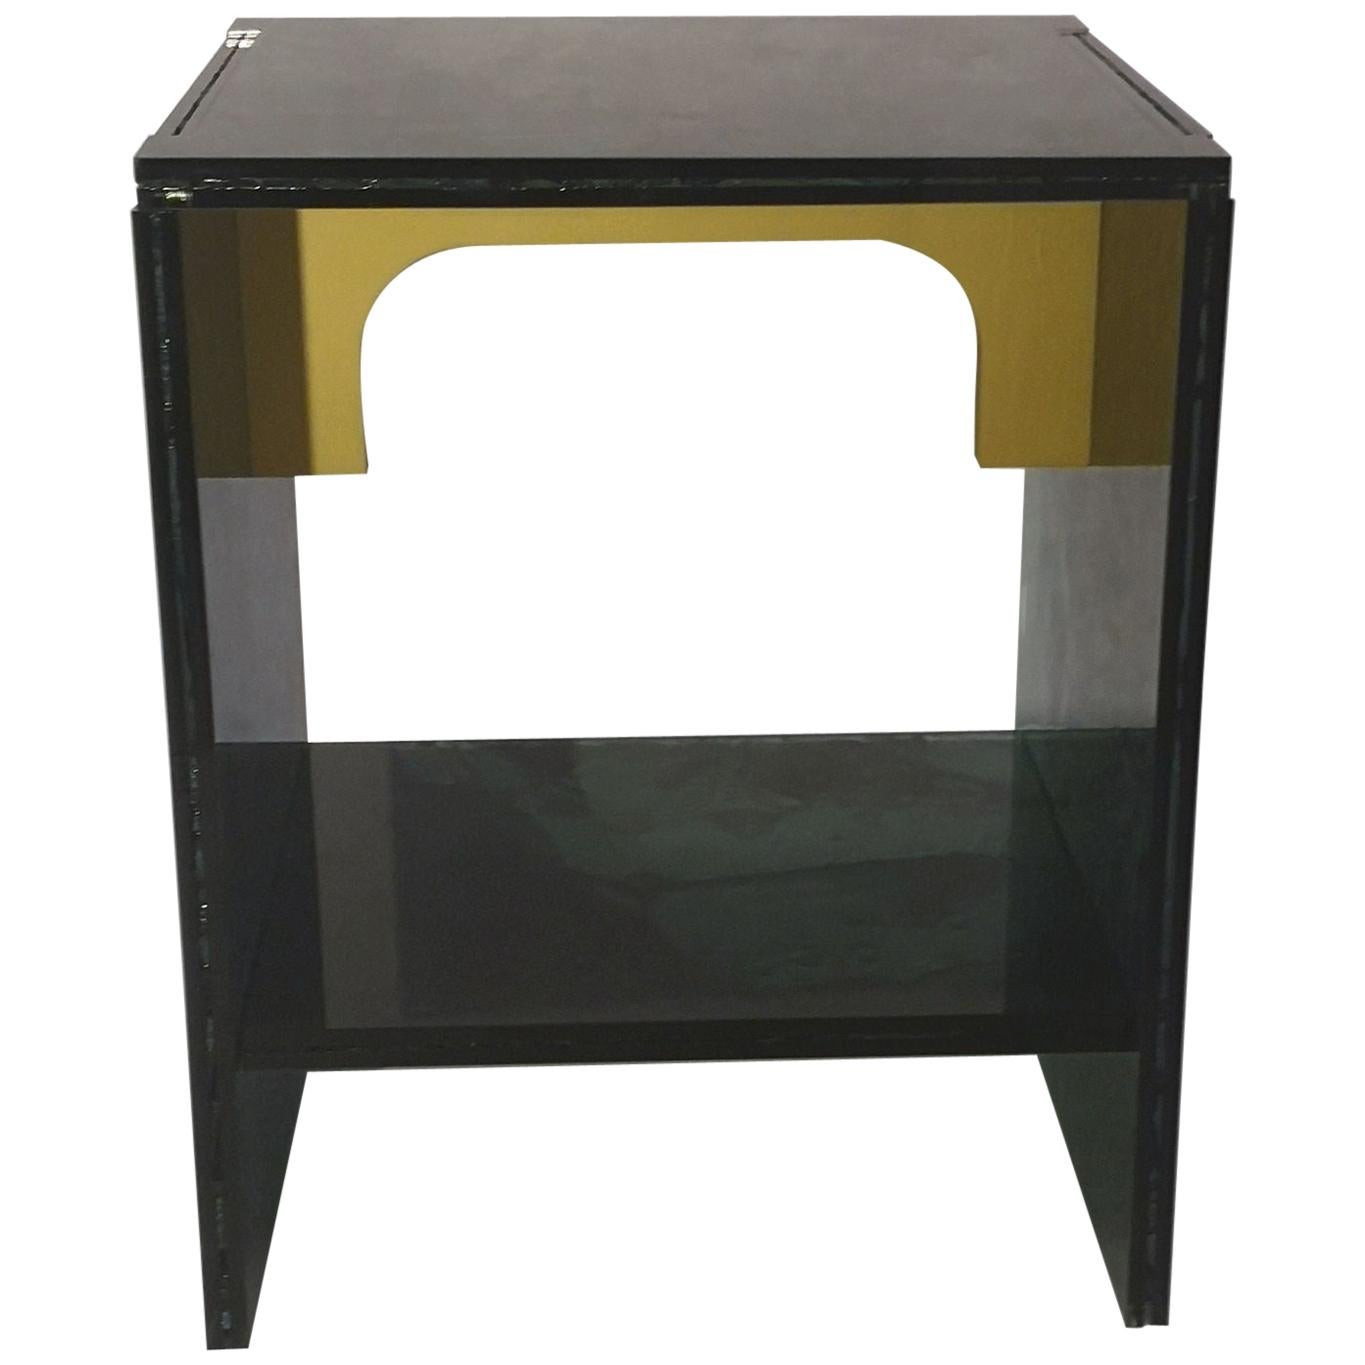 Sketch Quadro Side Table 2 Made Green Moss Acrylic D. Roberto Giacomucci in 2020